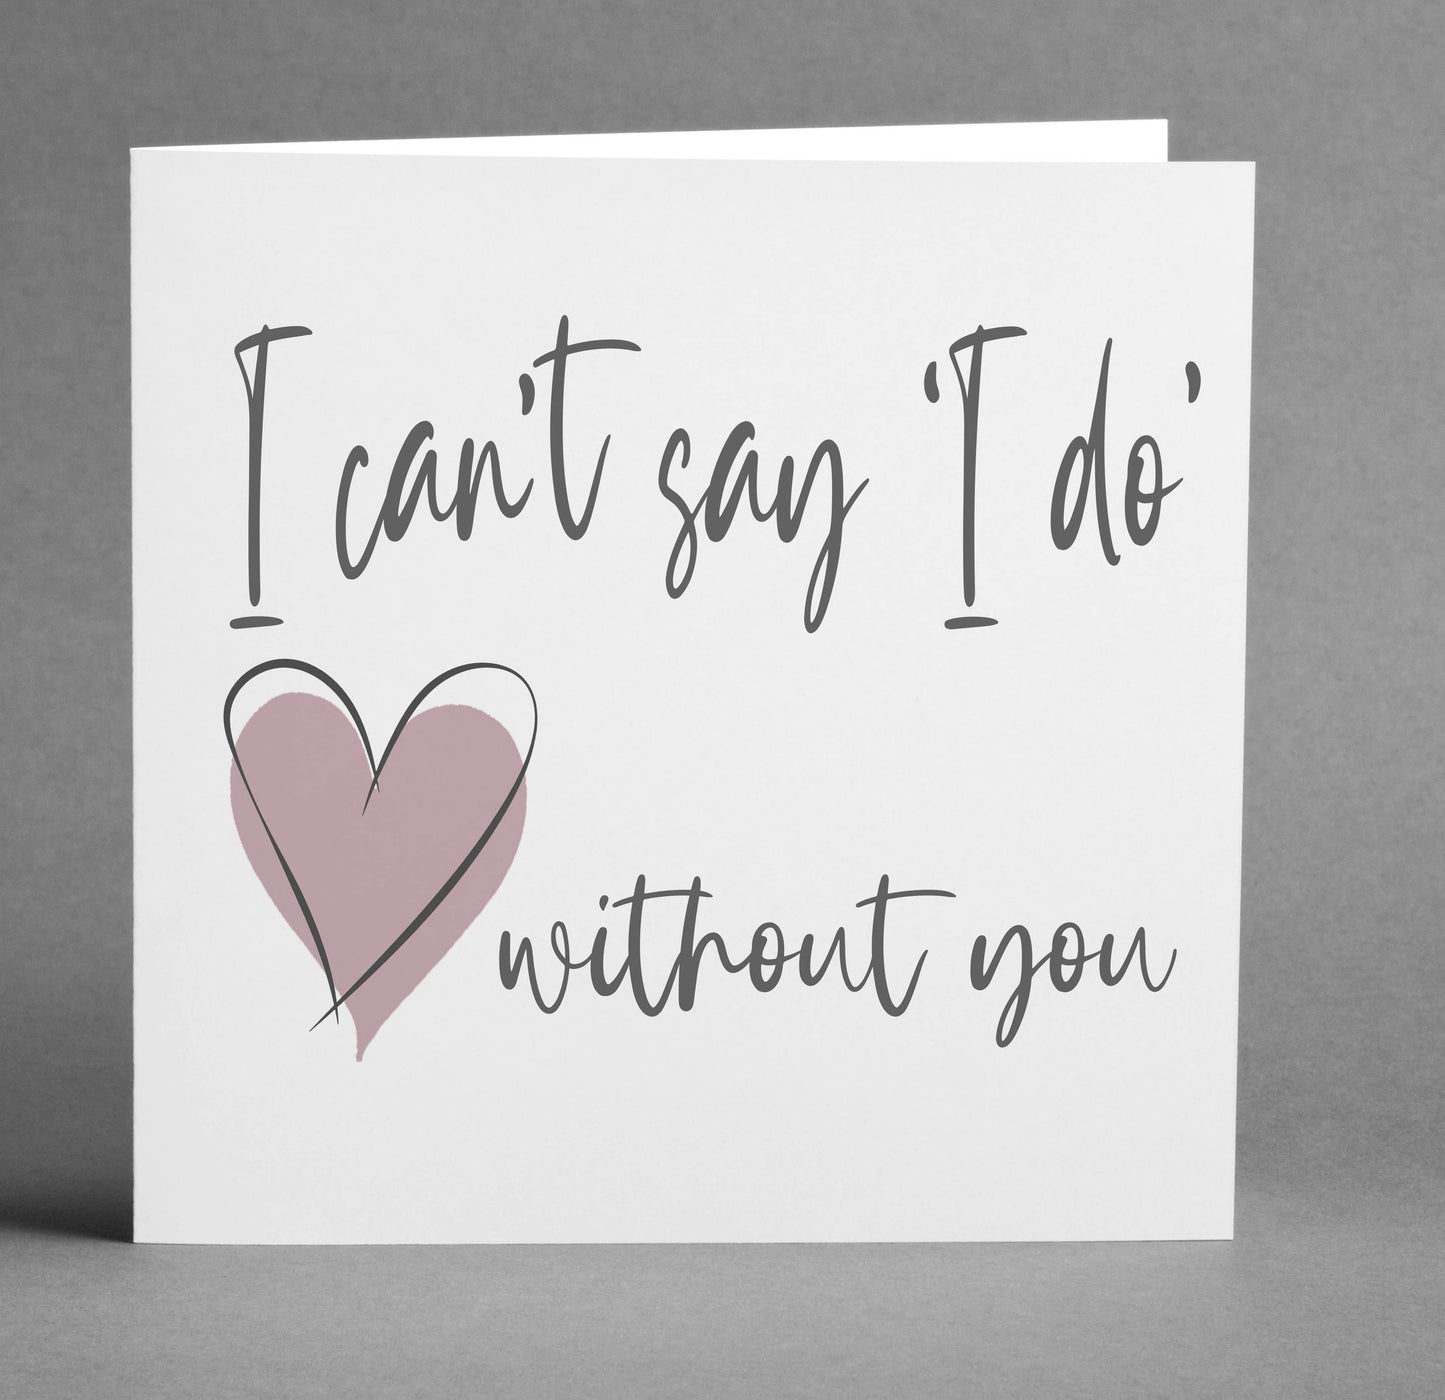 I can't say 'I do' without you square card